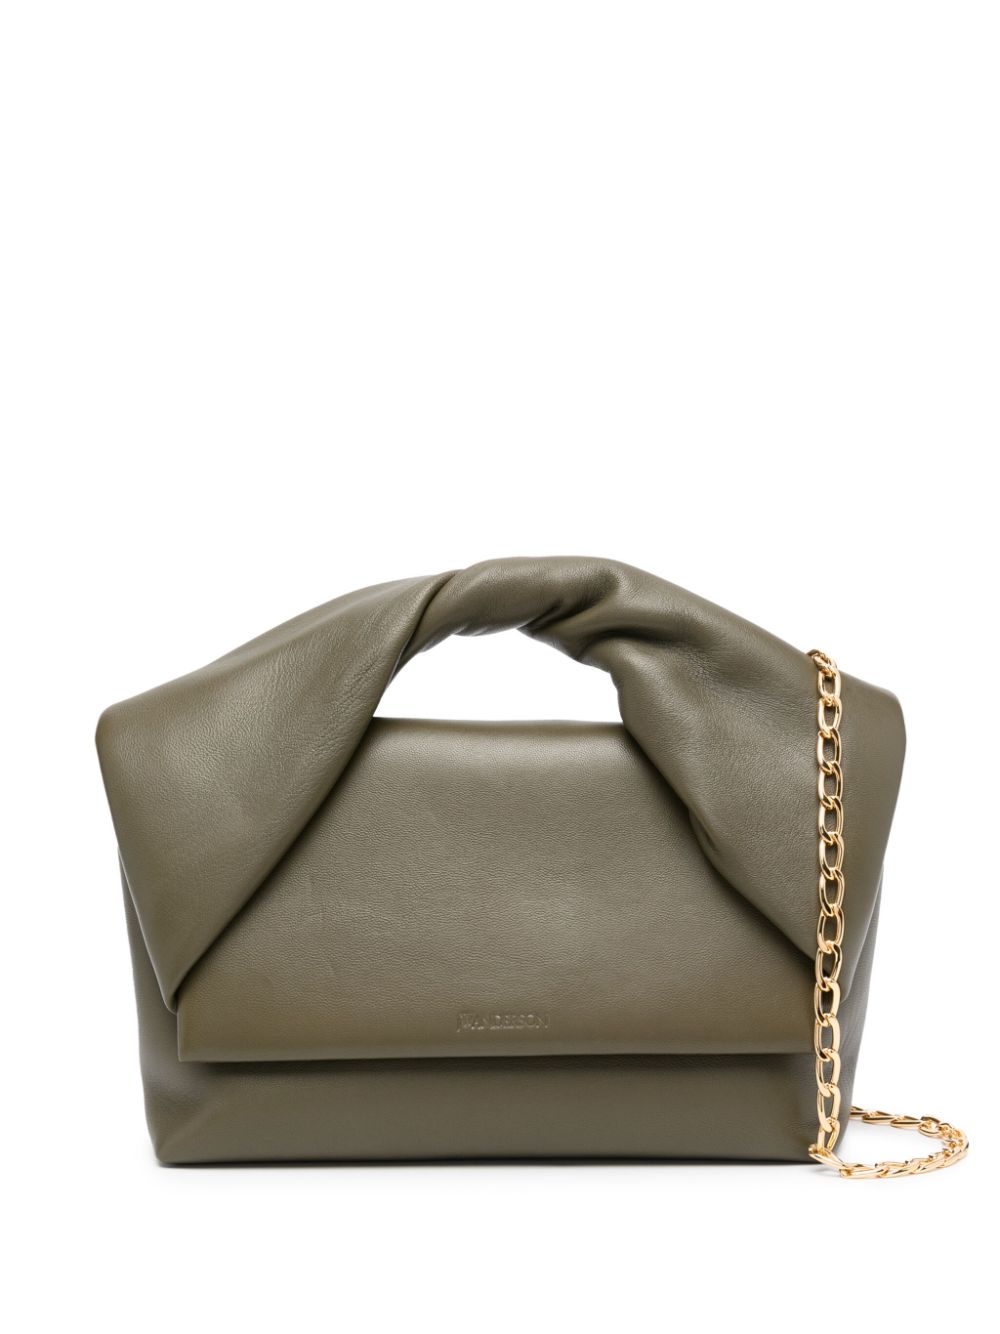 JW Anderson Twister leather tote bag - Green von JW Anderson